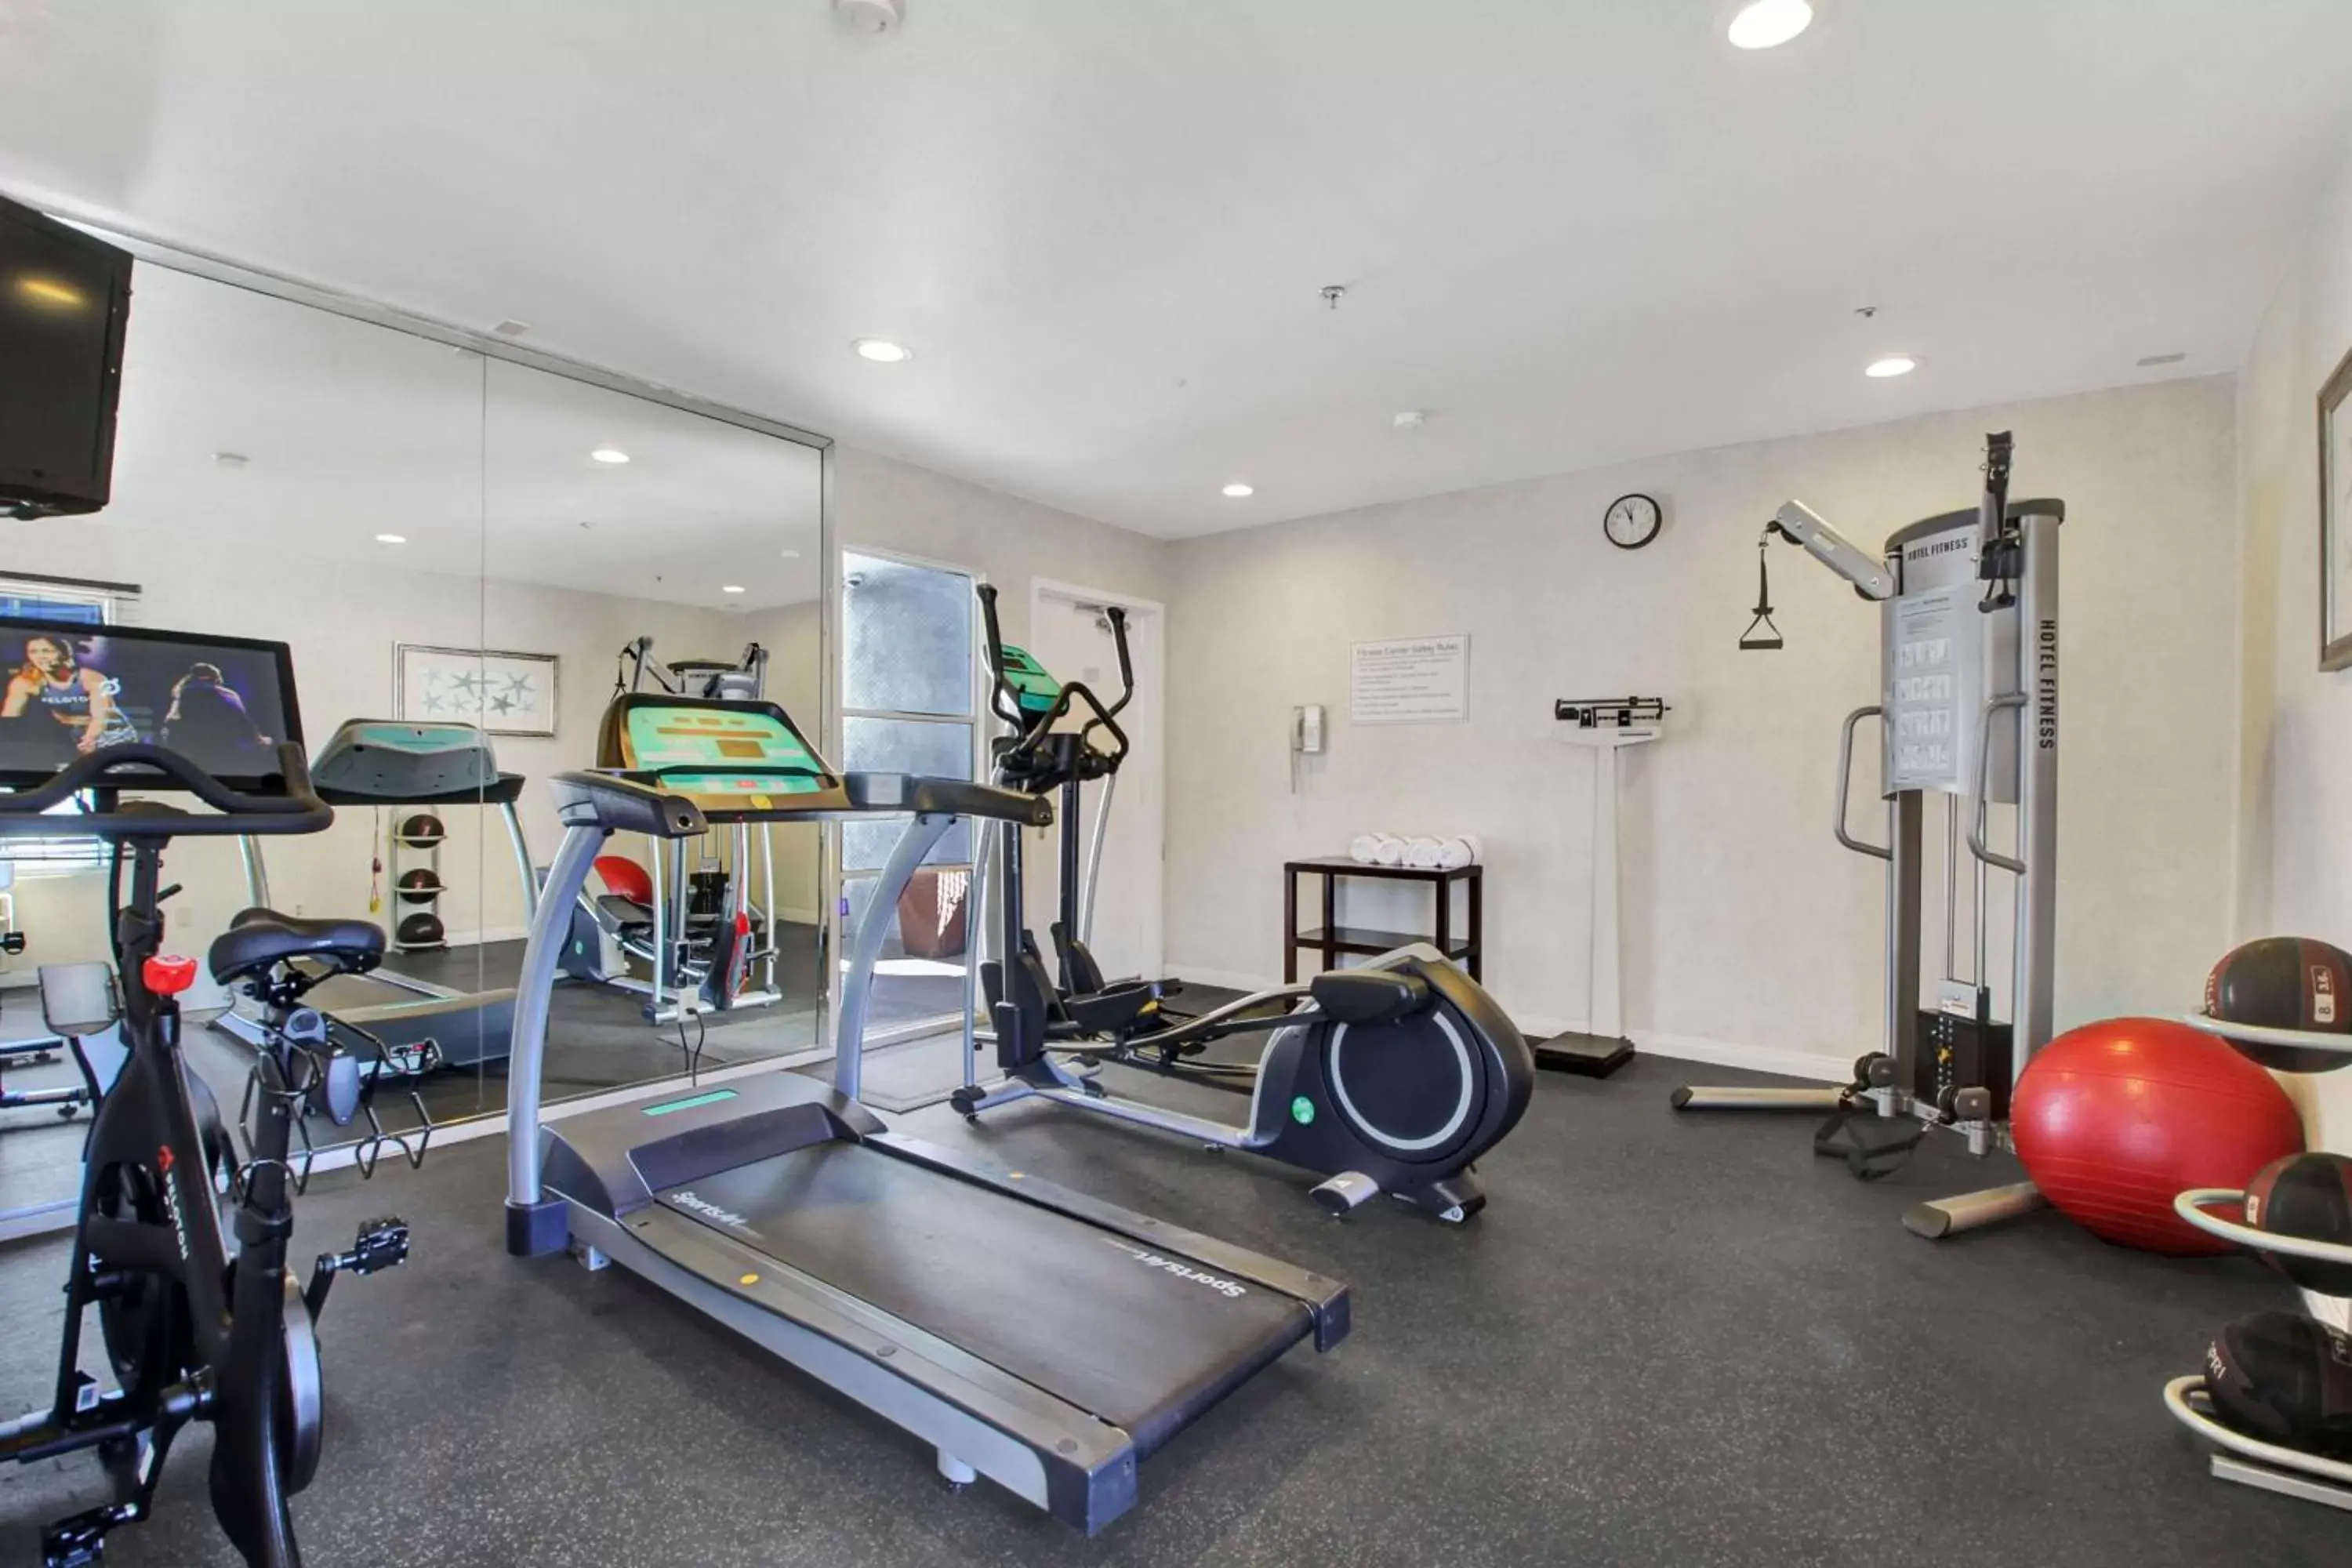 Fitness centre/facilities, Fitness Center/Facilities in Best Western Plus Marina Shores Hotel